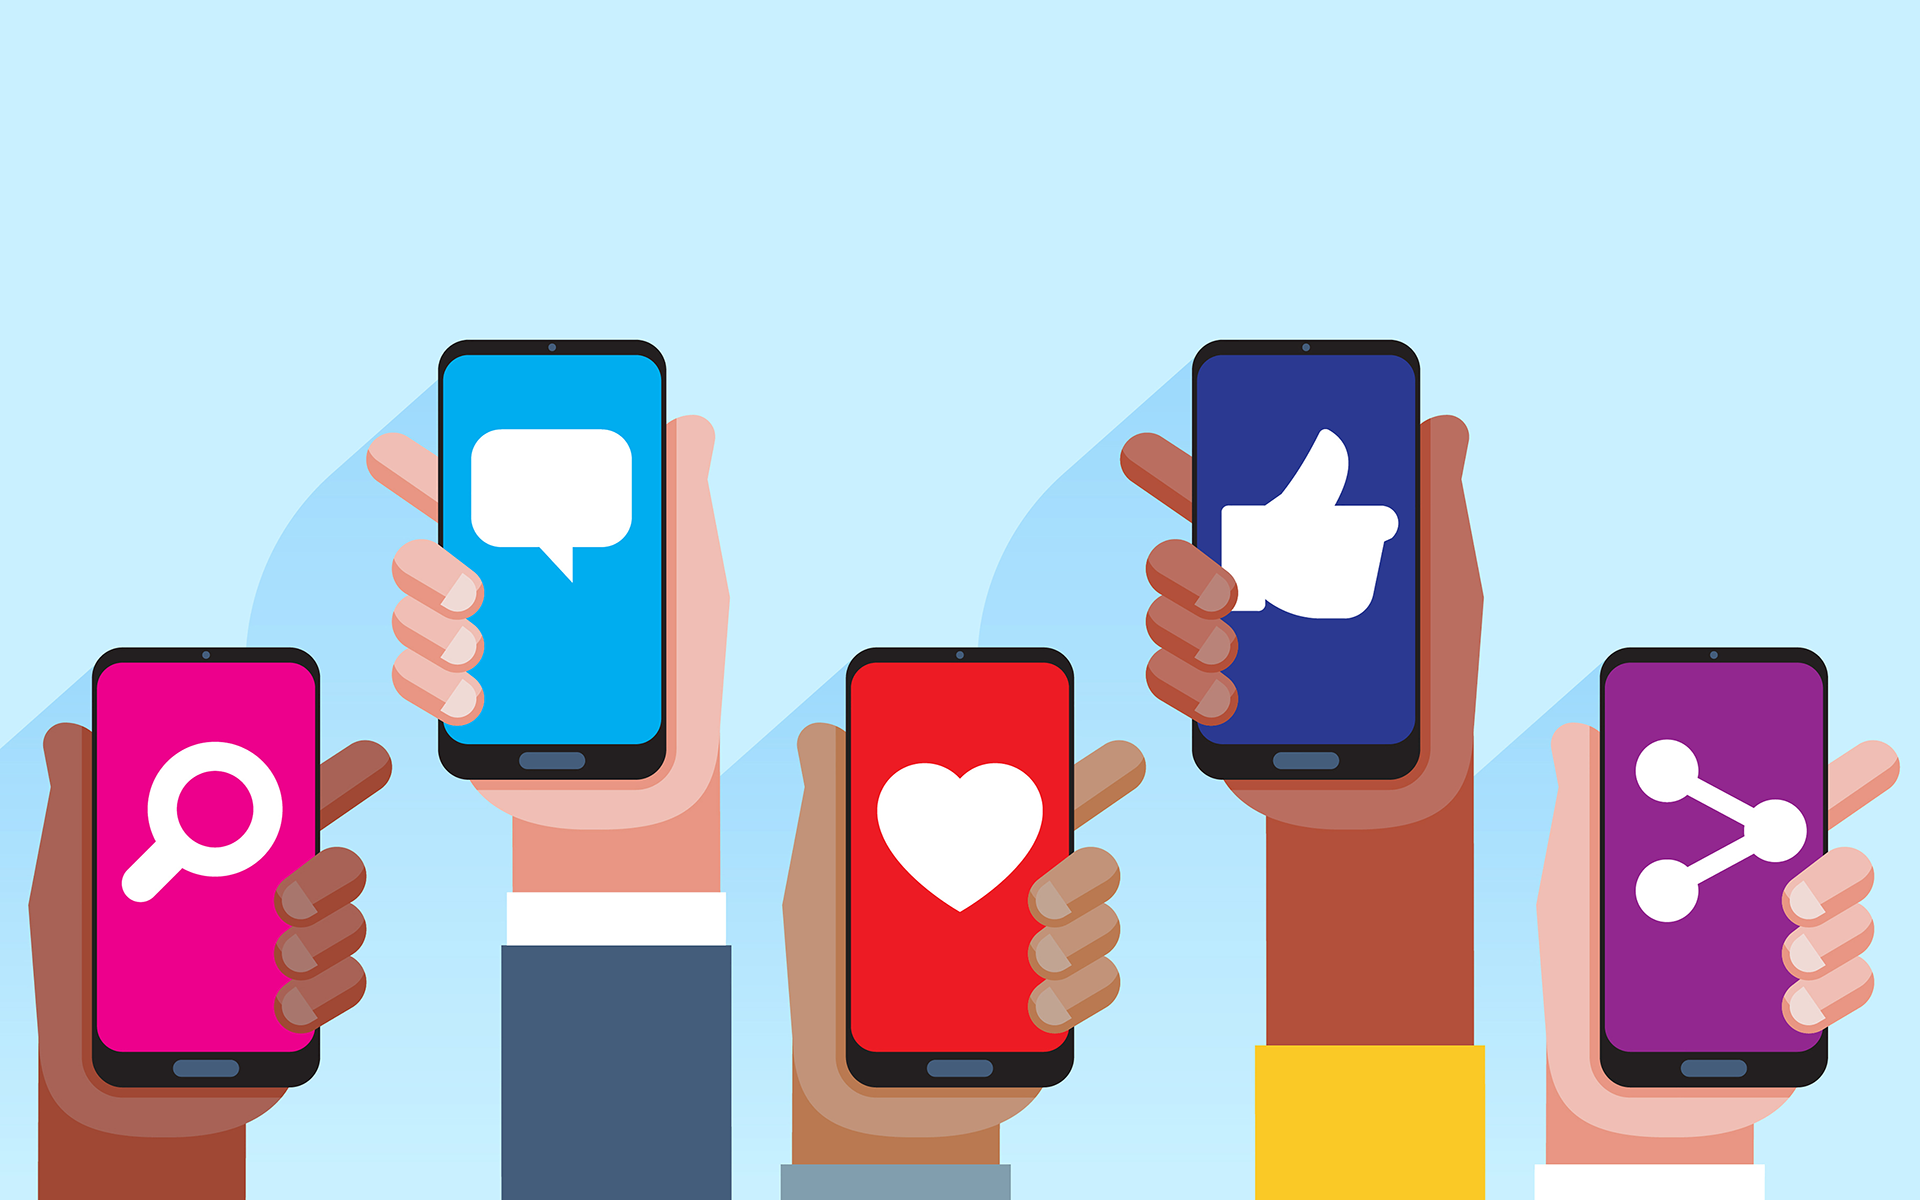 Illustration of five people holding up cell phones that show various social media icons on the their screens.